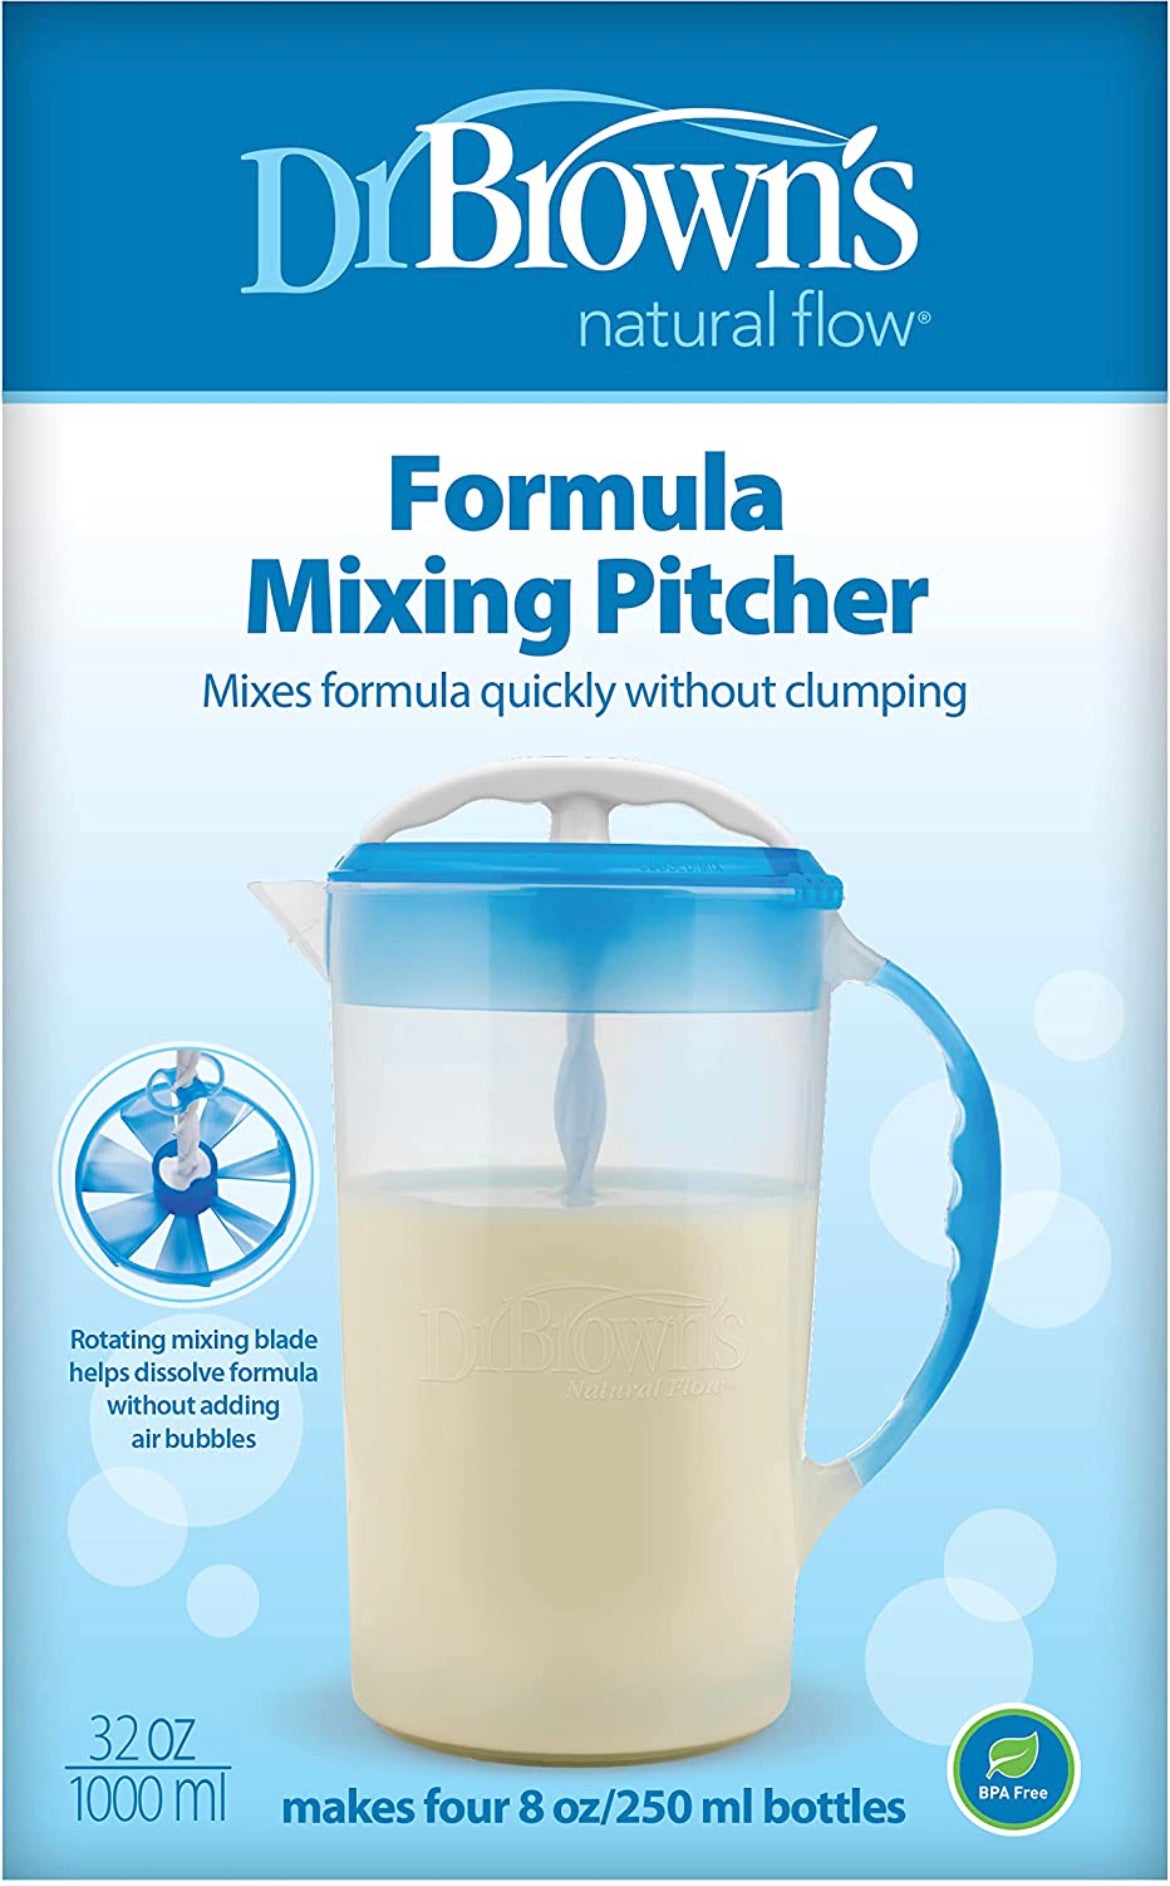 Dr. Brown's Formula Mixing Pitcher.